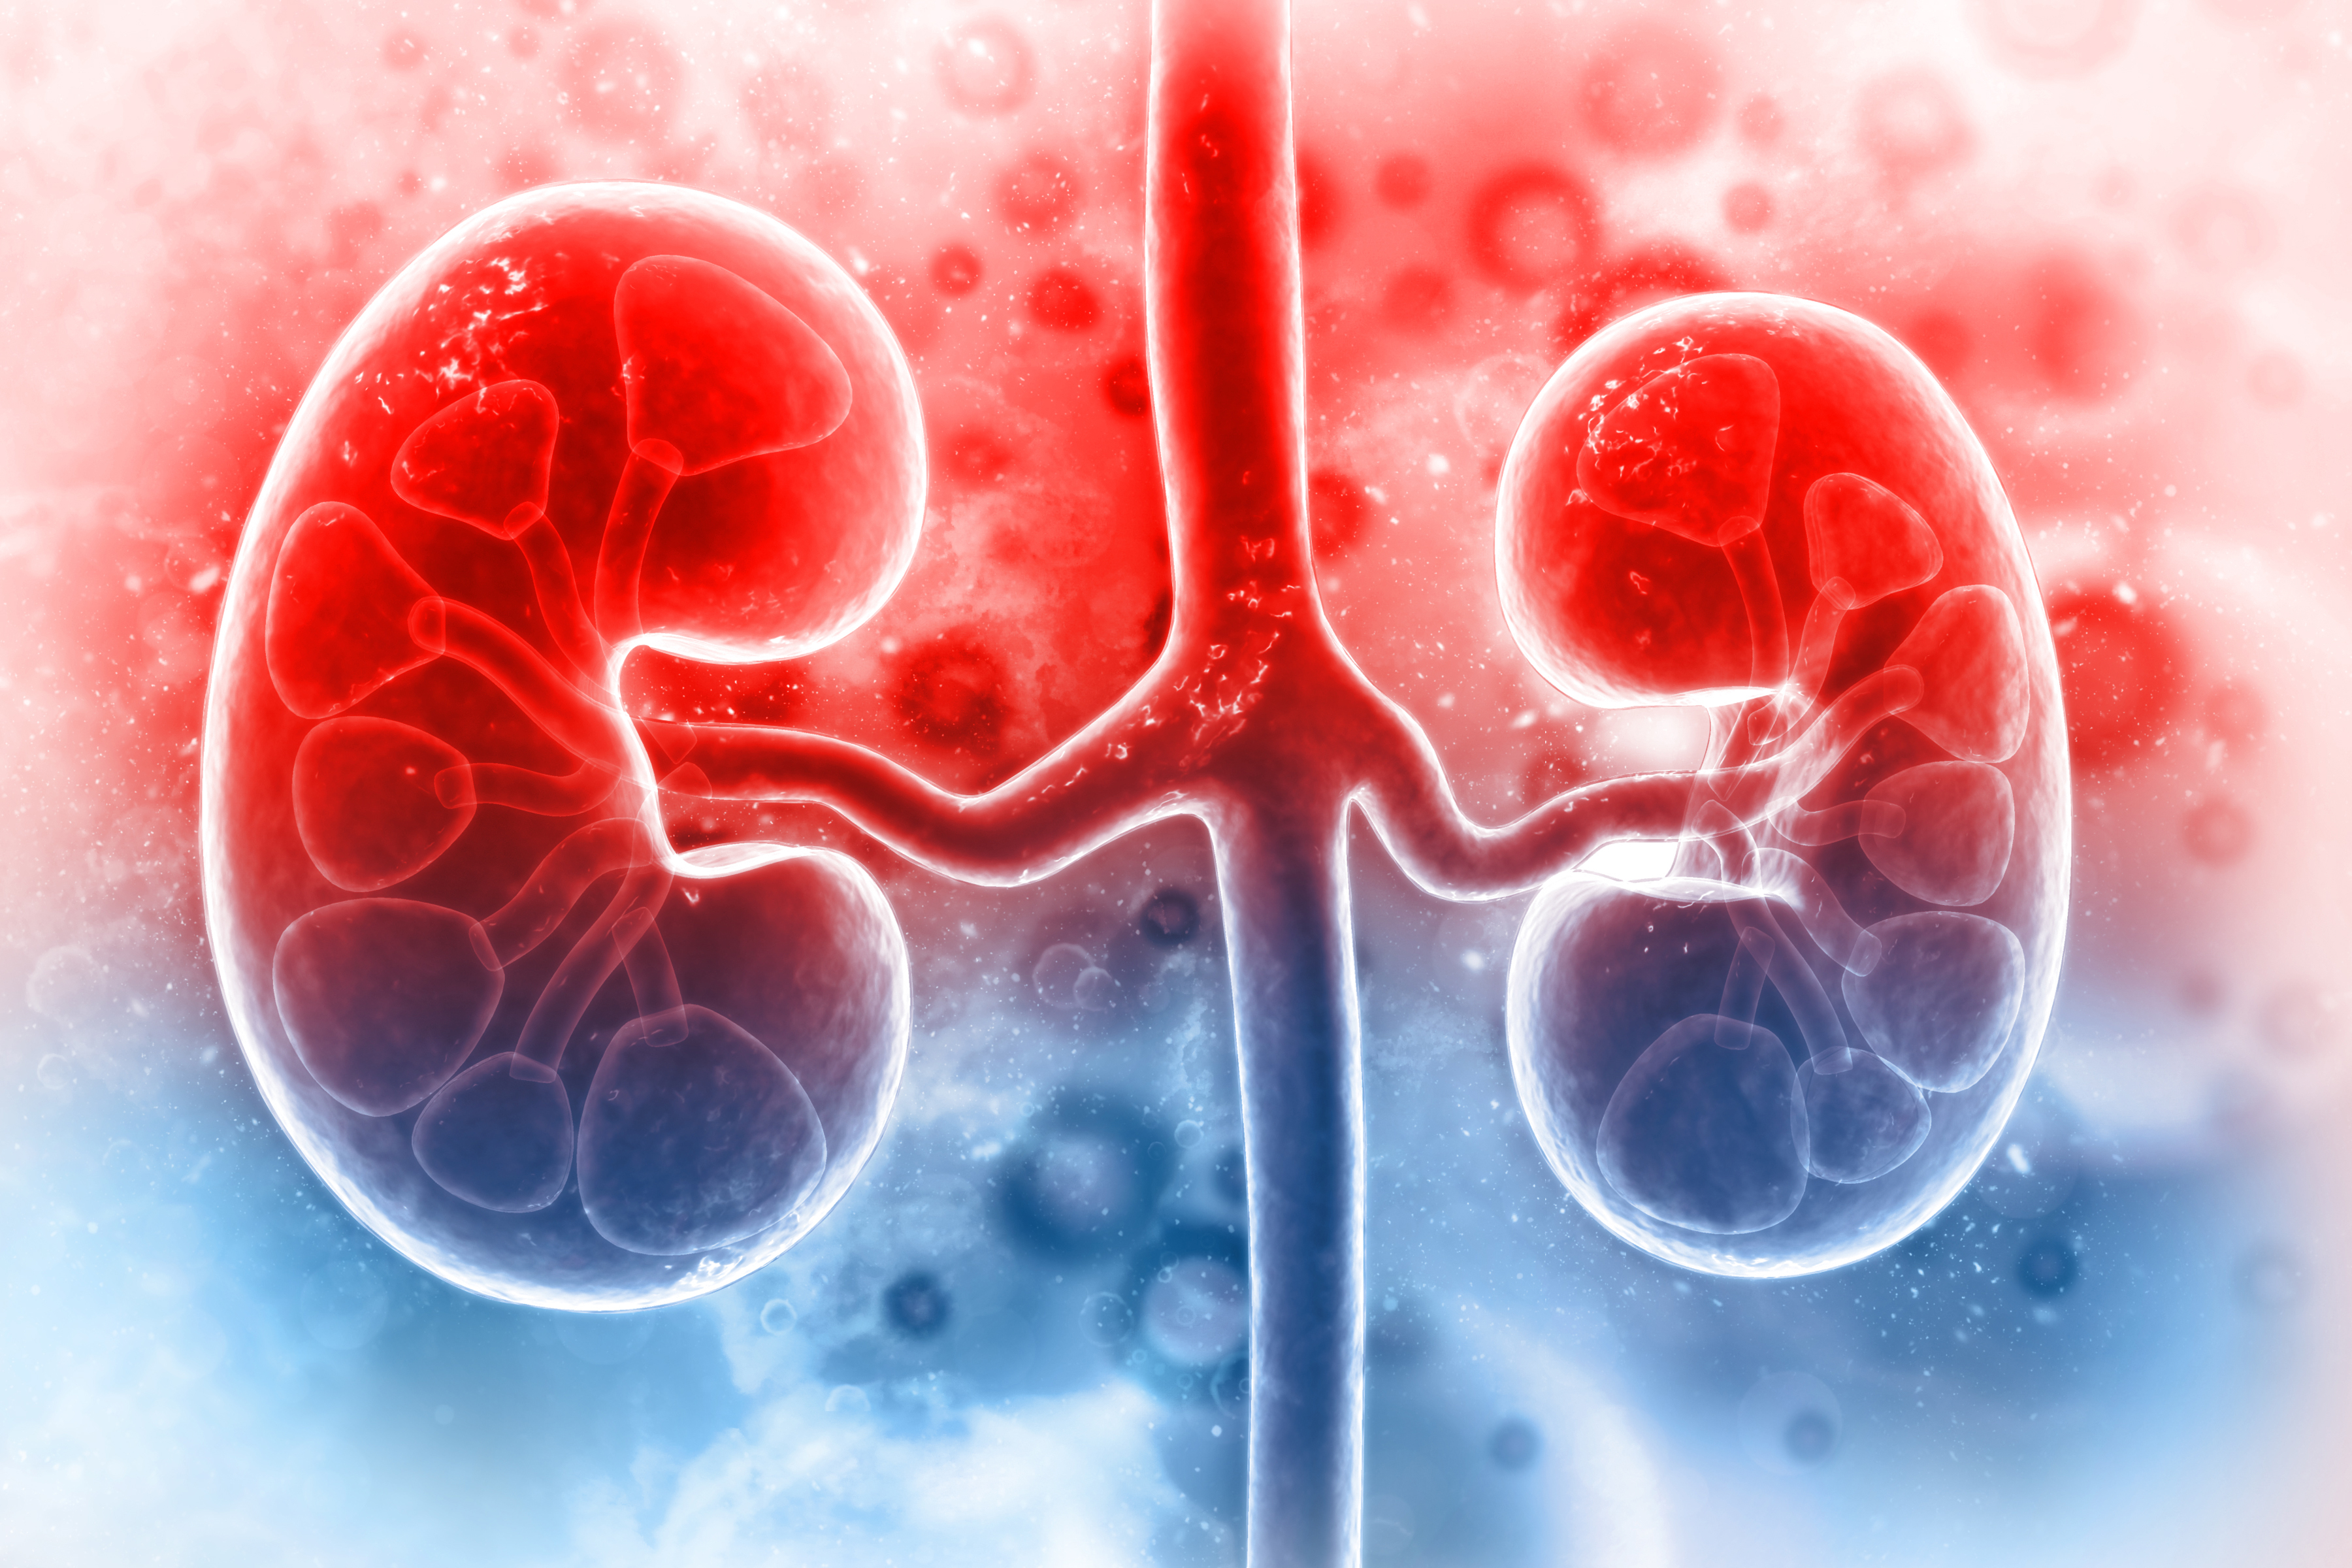 Kidney Disease: It's More Common Than You Think